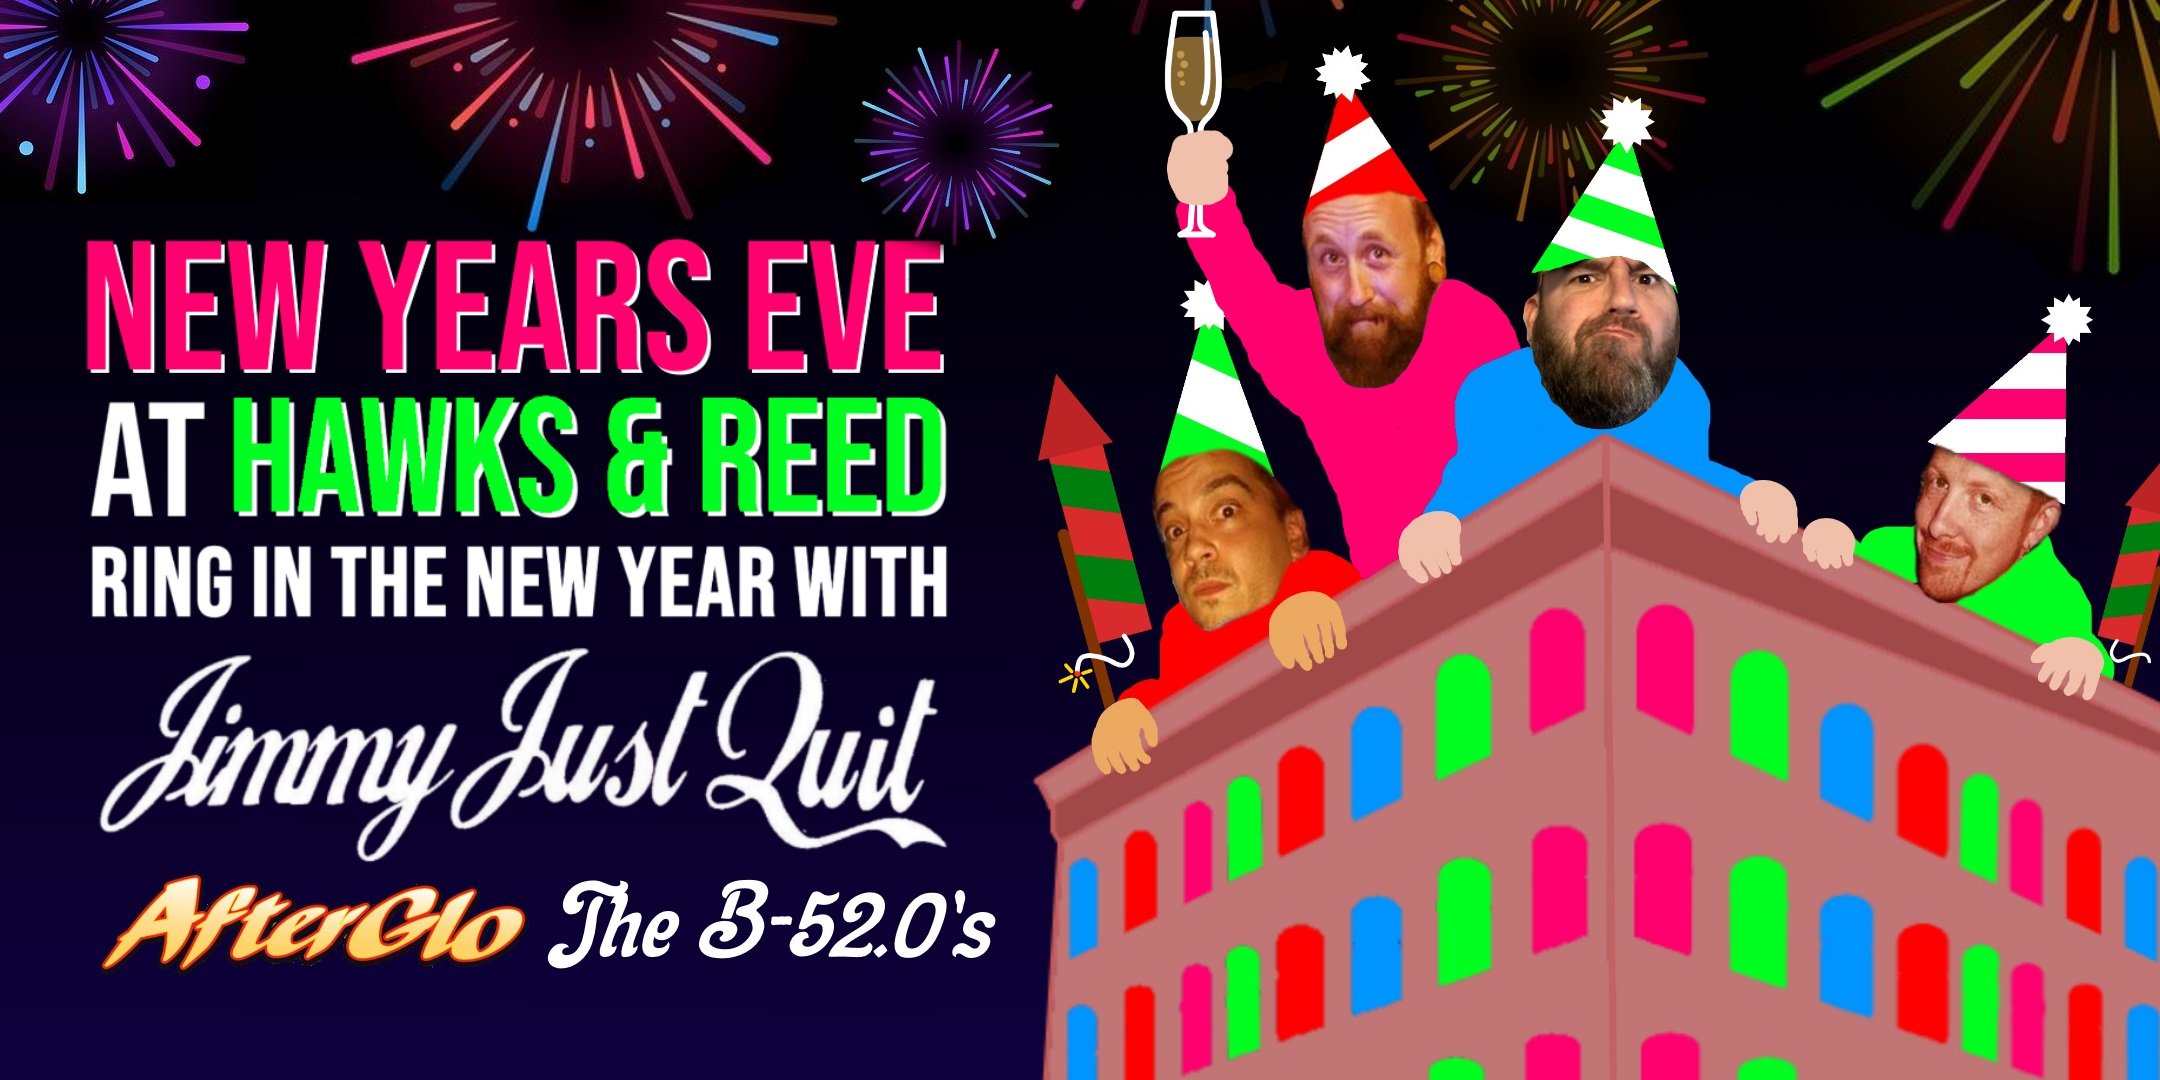 New Years Eve at Hawks & Reed ft. Jimmy Just Quit, AfterGlo, The B-52.0’s